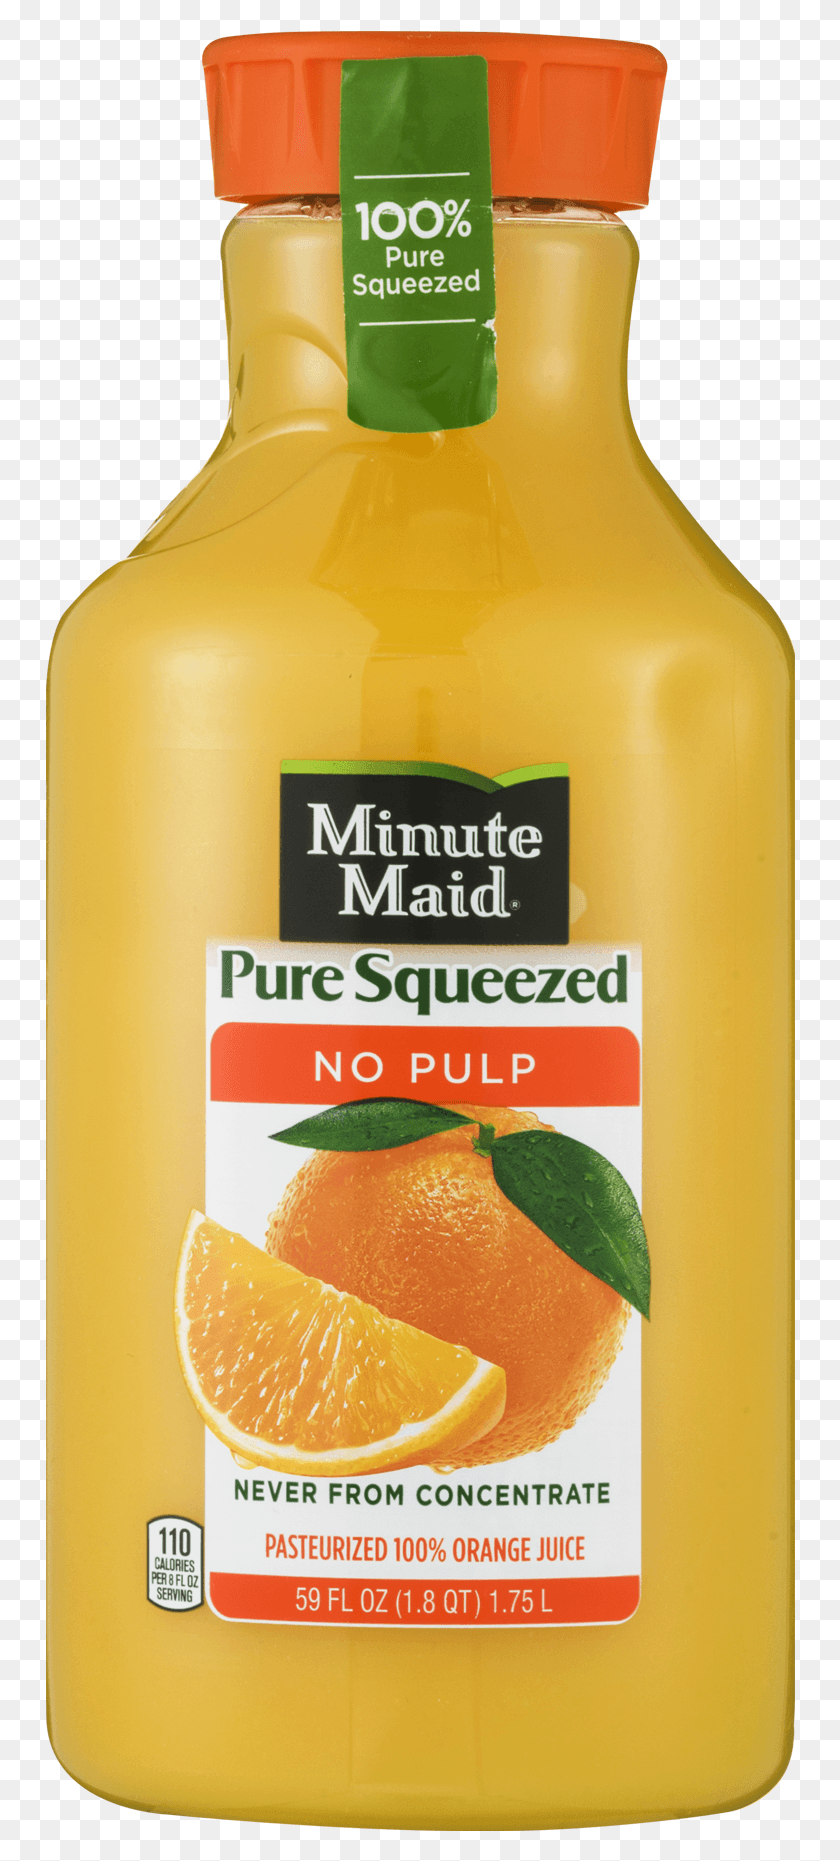 Minute Maid Pure Squeezed No Pulp 100 Orange Juice Minute Maid Pure Squeezed Orange Juice No Pulp 52 Fl Bottle Plant Juice Hd Png Download Stunning Free Transparent Png Clipart Images Free Download